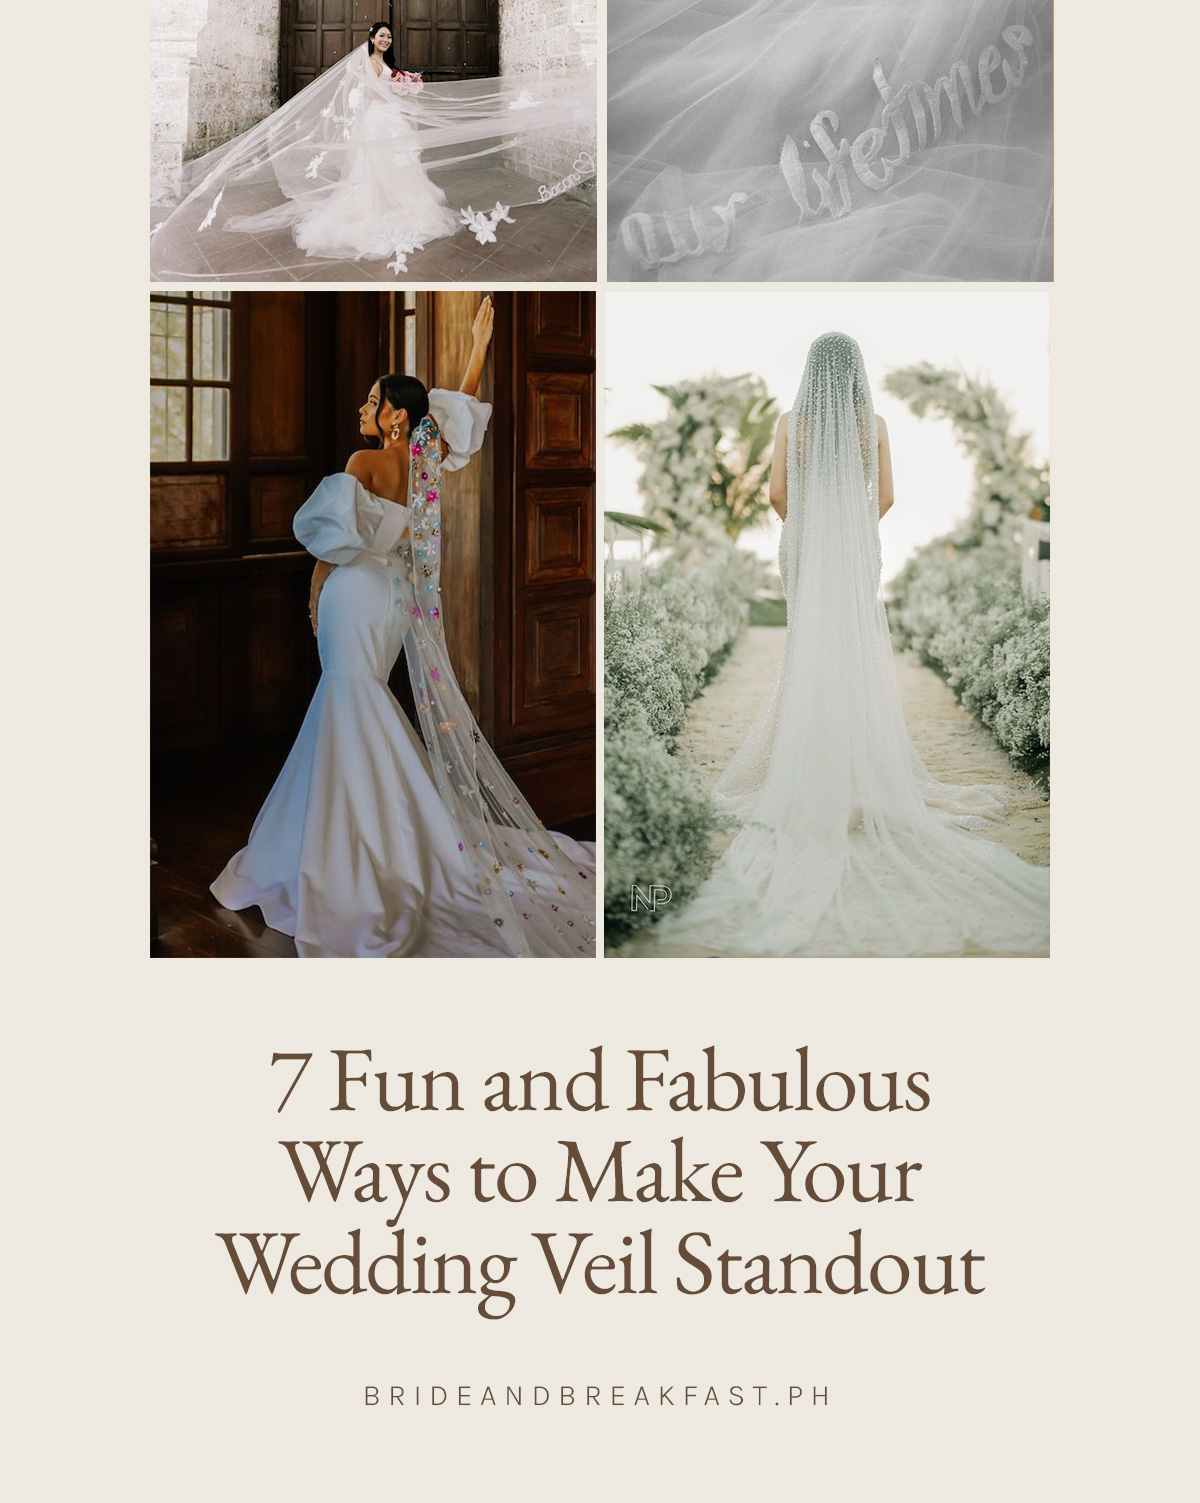 7 Fun and Fabulous Ways to Make Your Wedding Veil Standout